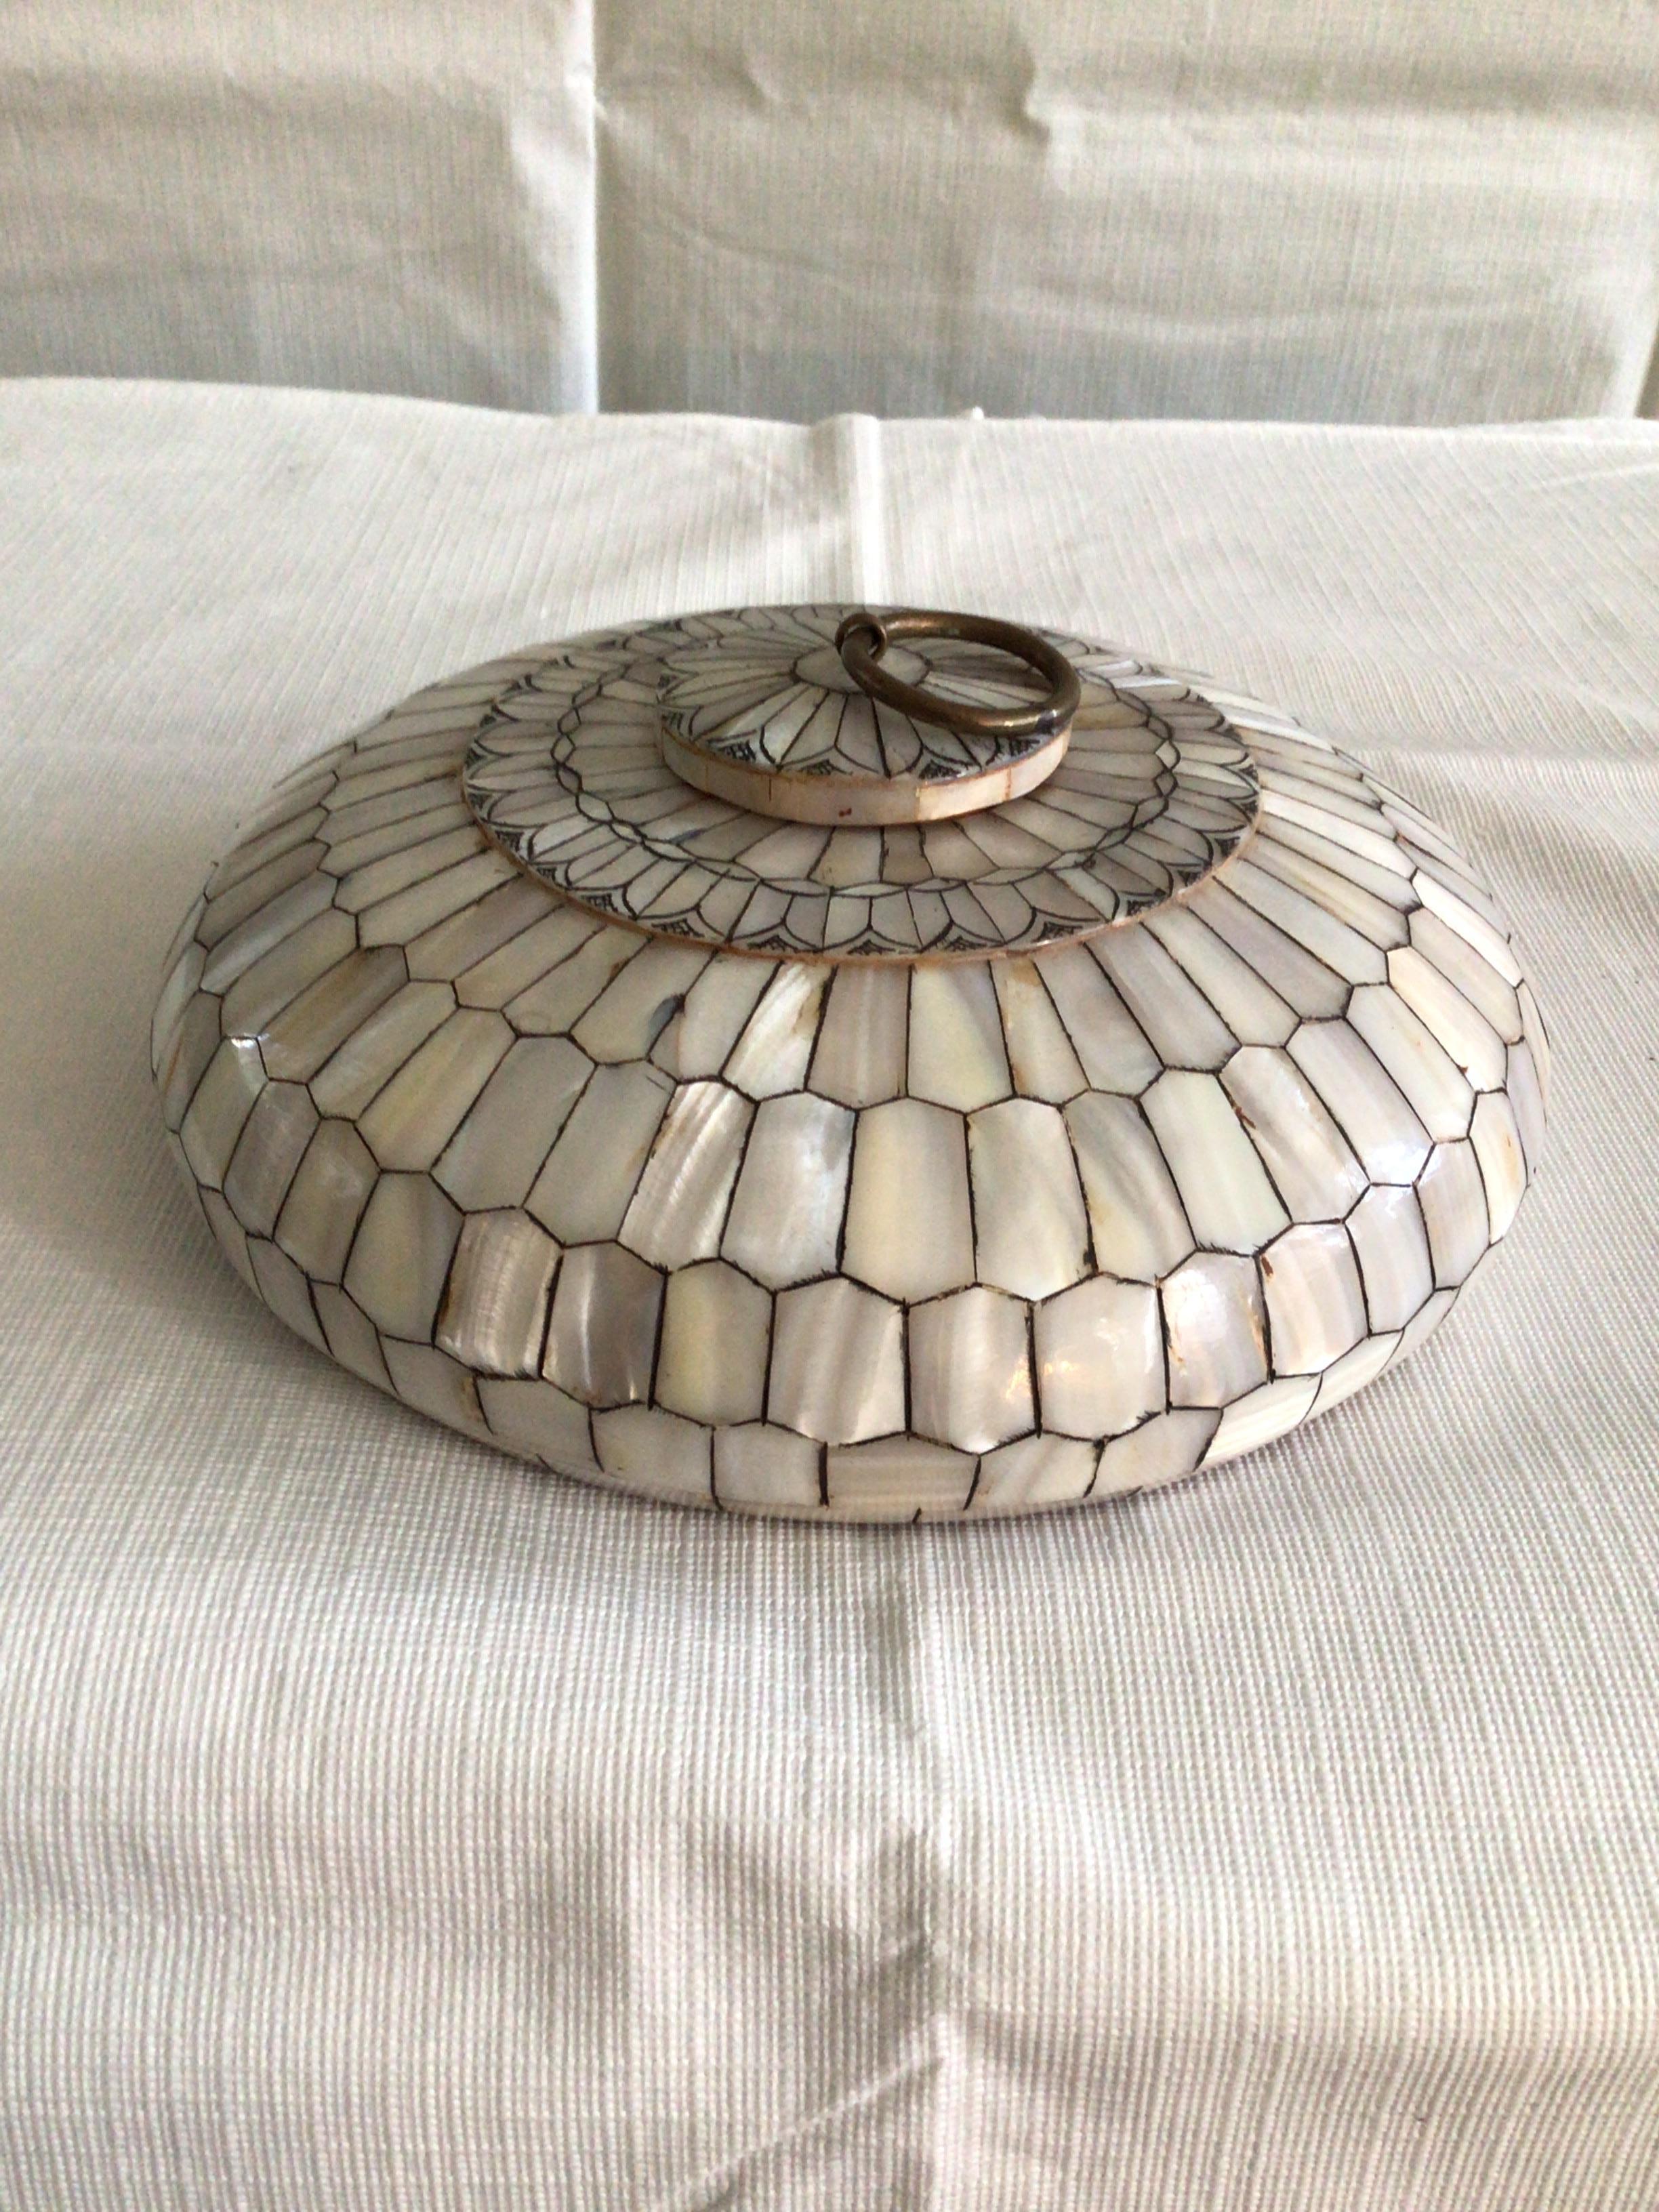 1920s circular mother of pearl box with removable lid. Mother of pearl tiles are hand applied to this solid circular wooden lidded box.